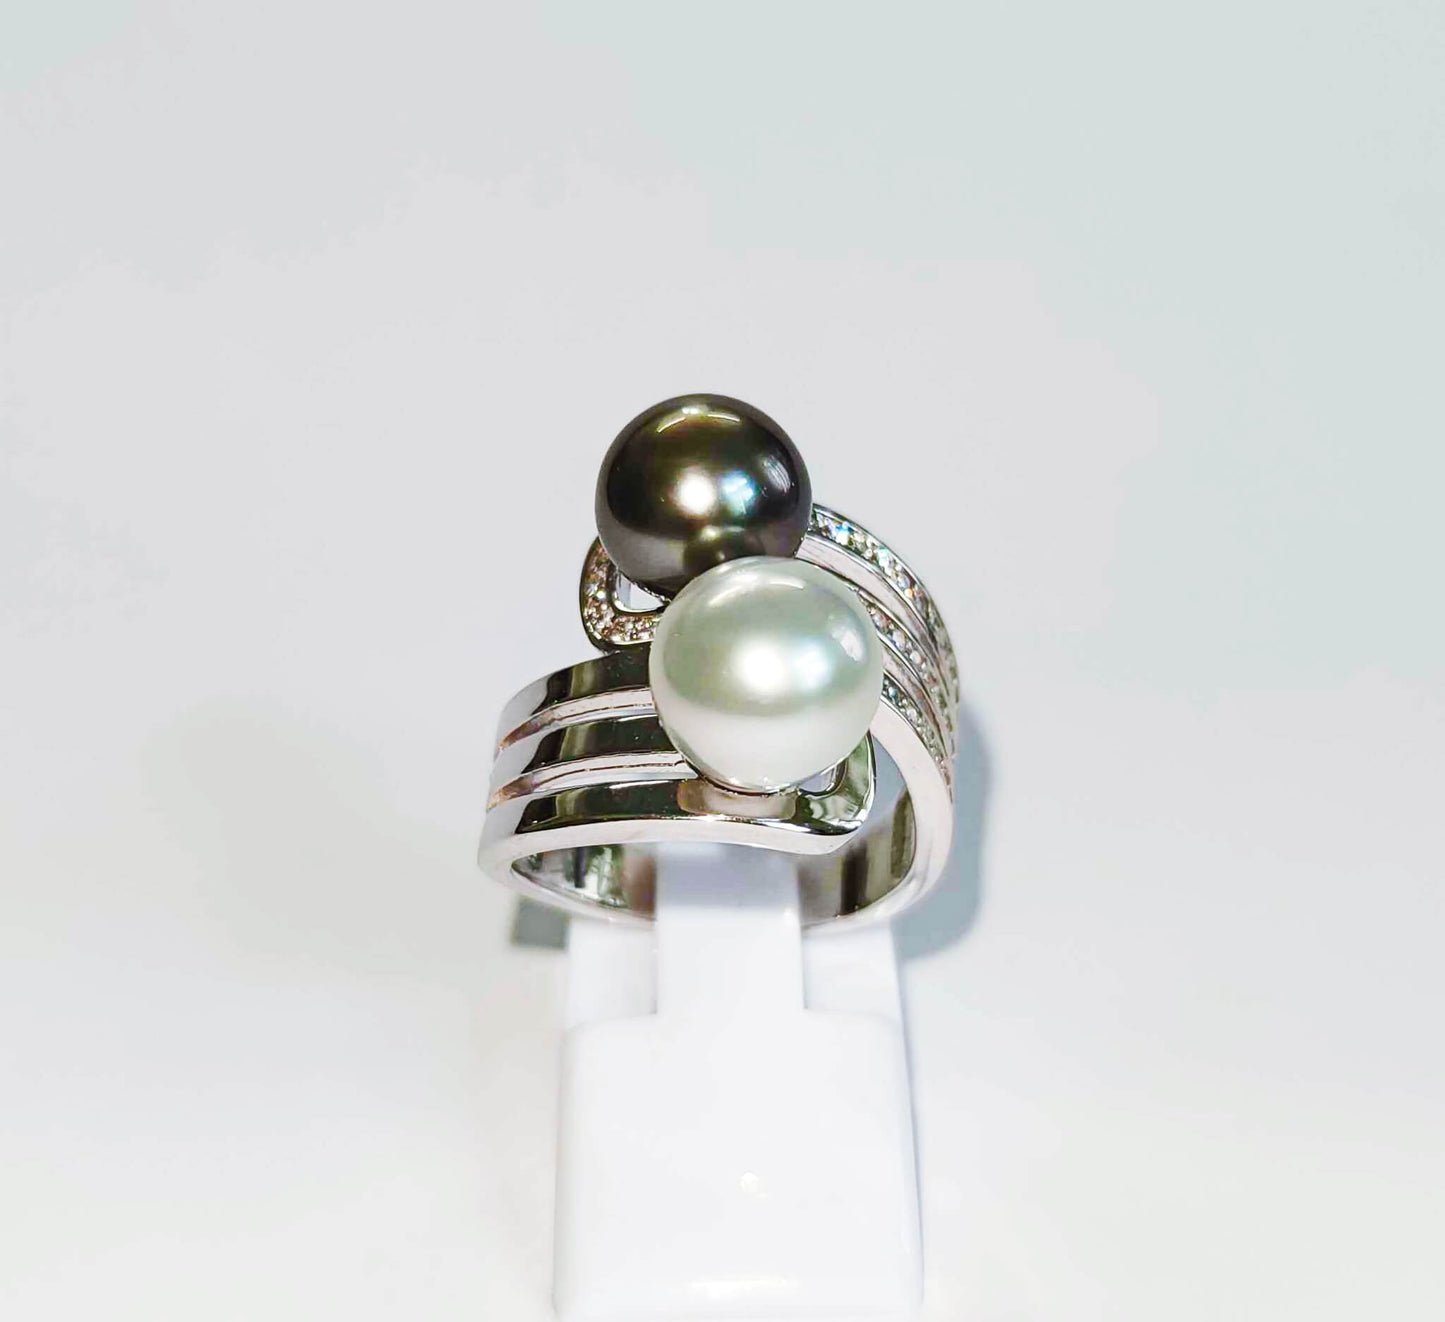 Silver Yin and Yang Ring with White and Black Sea Pearls and Zircons